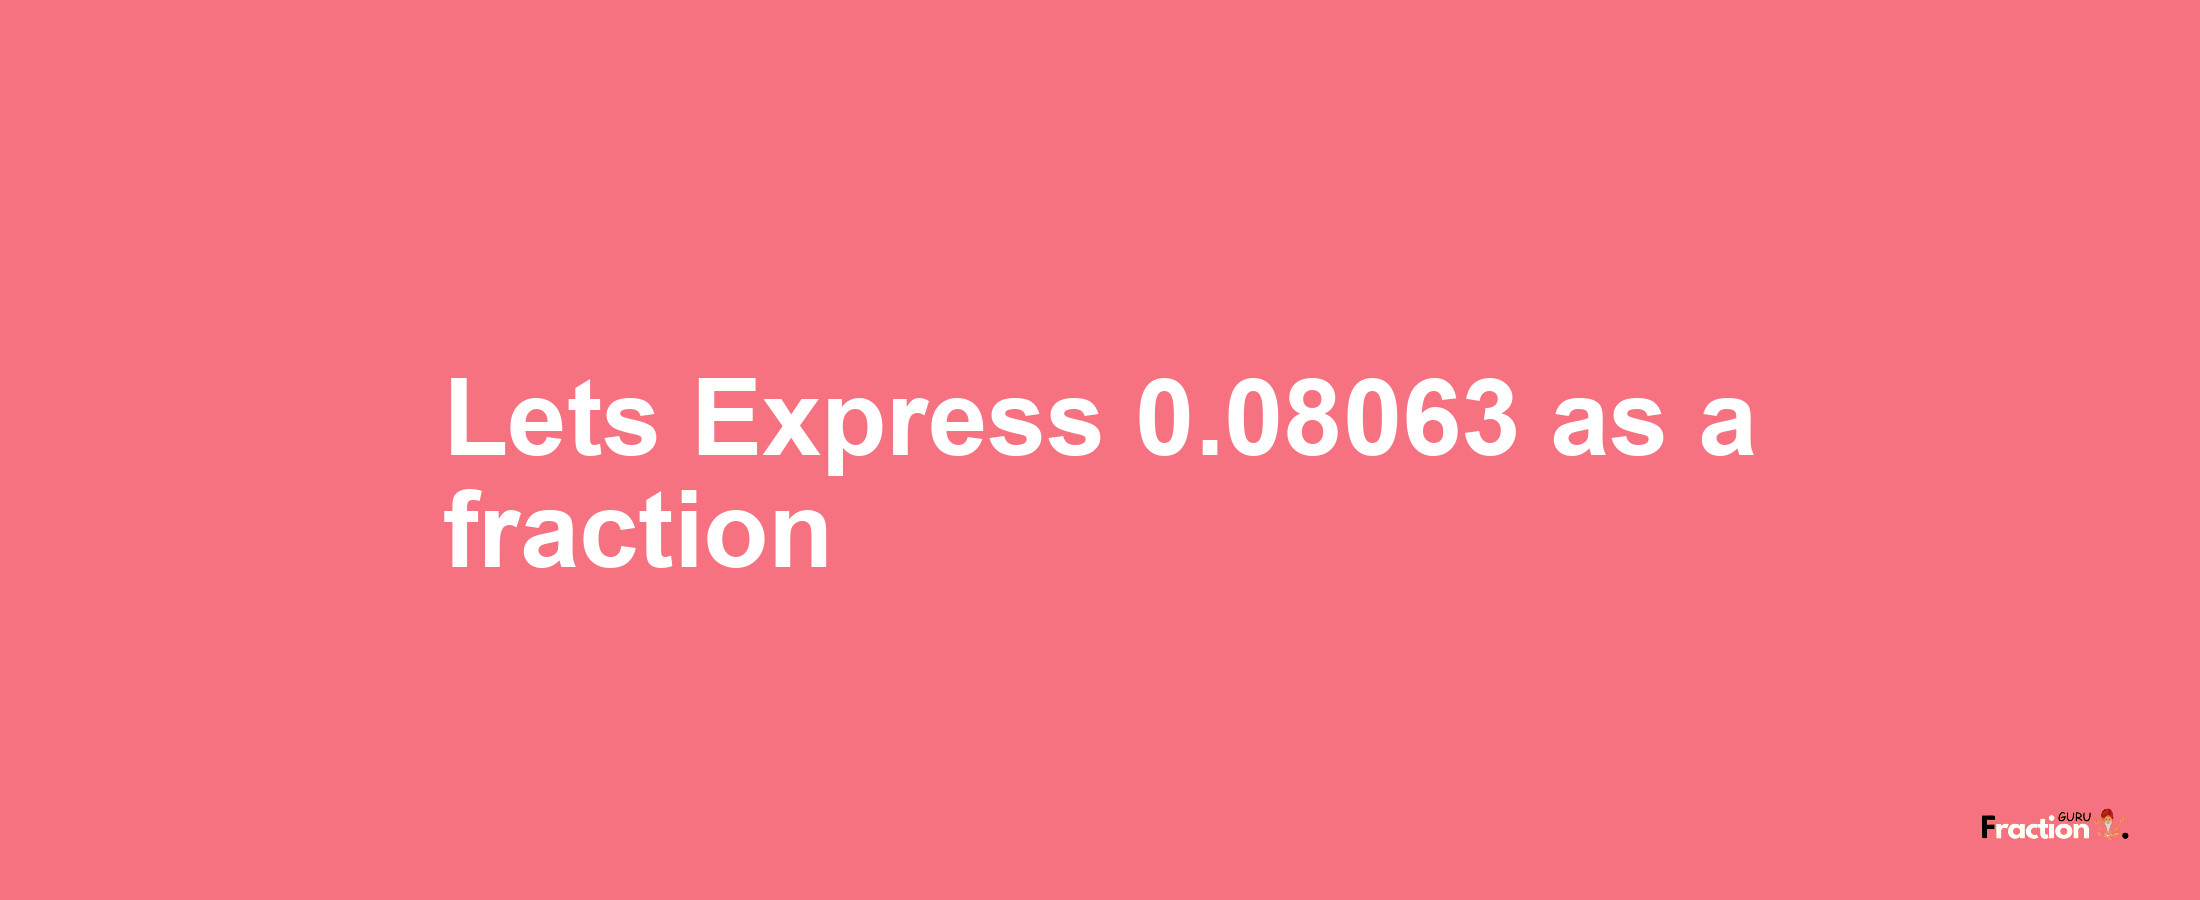 Lets Express 0.08063 as afraction